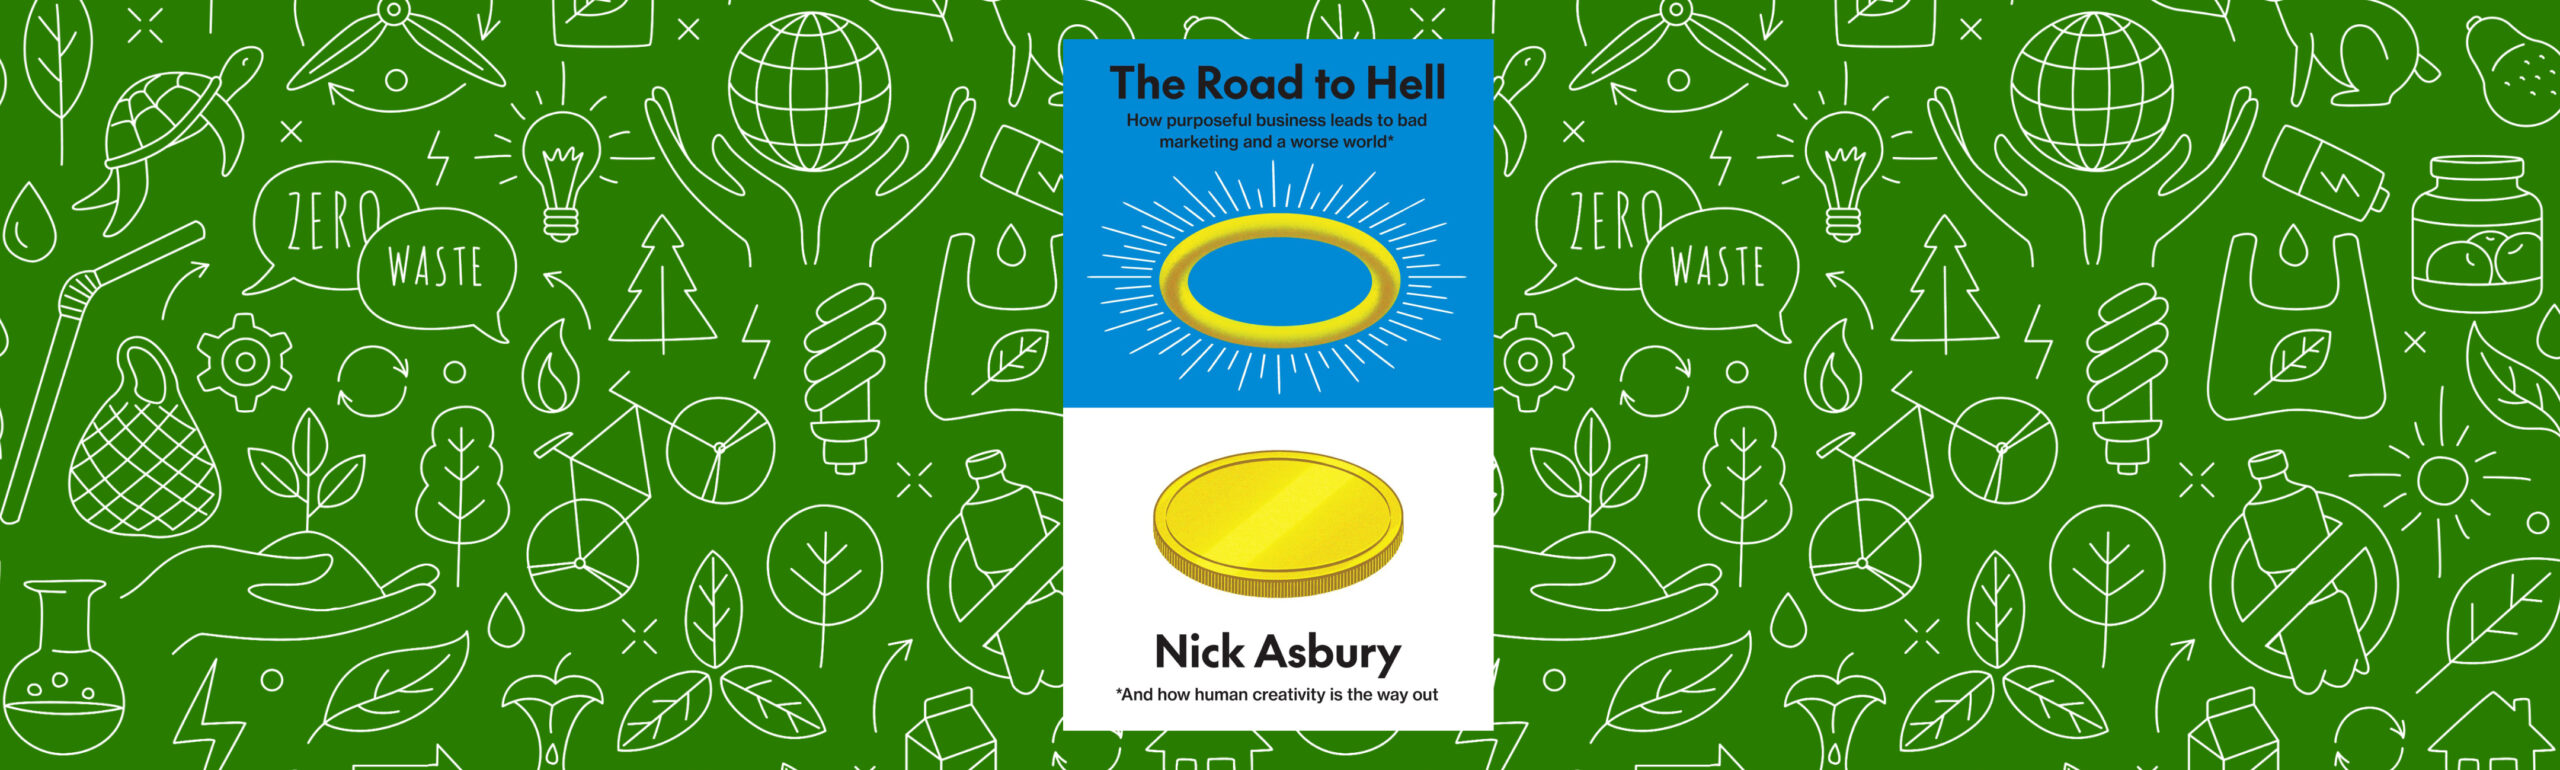 Page of a book the road to hell with green background